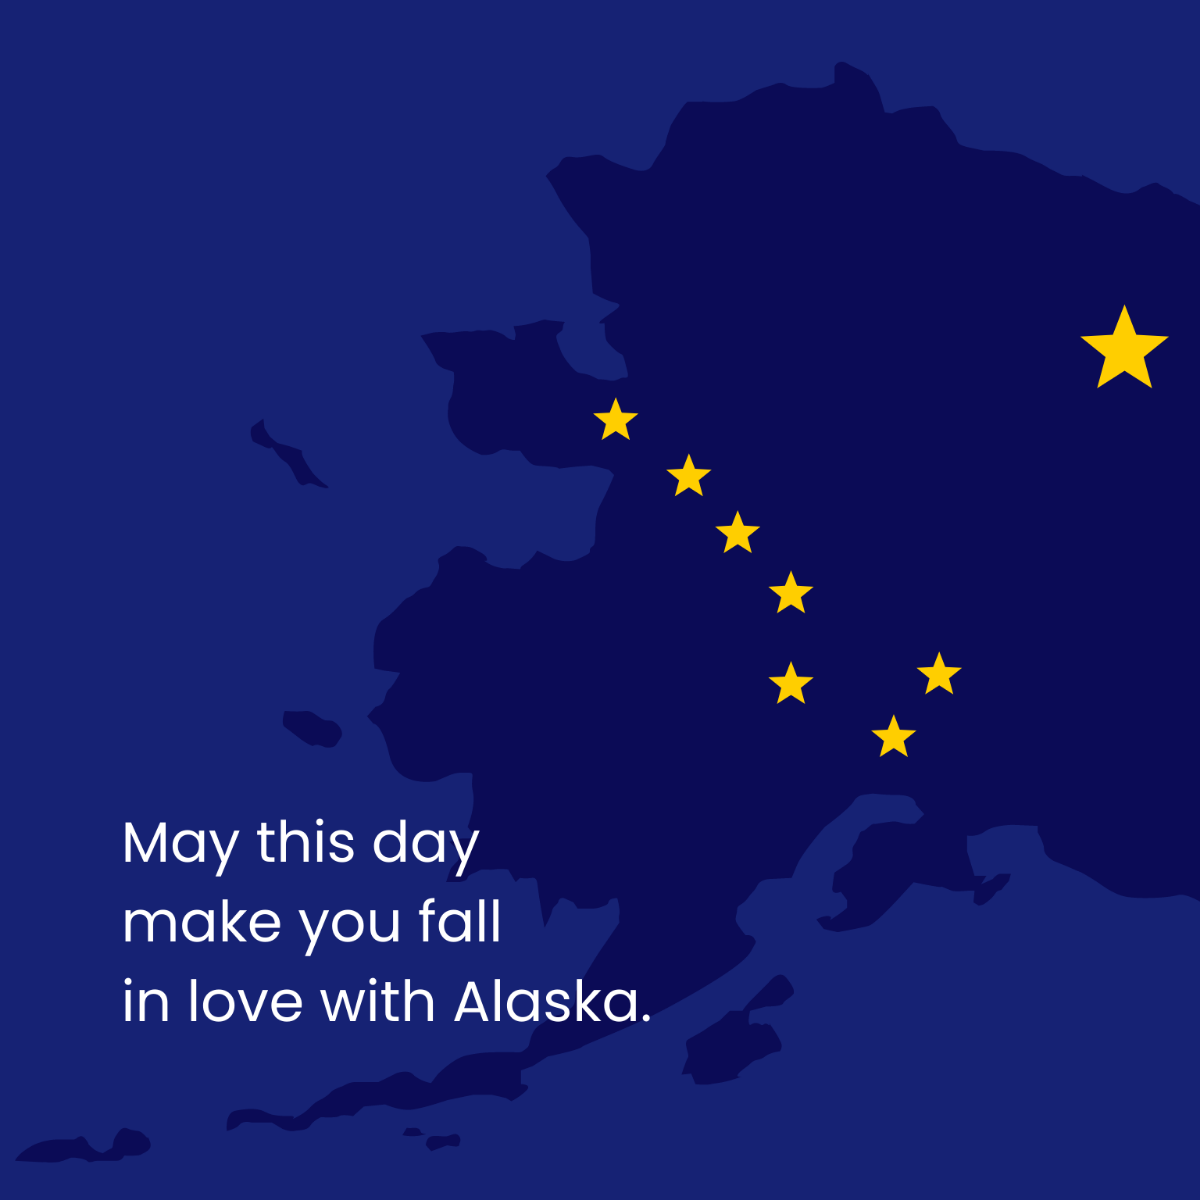 Free Alaska Day Wishes Vector Template